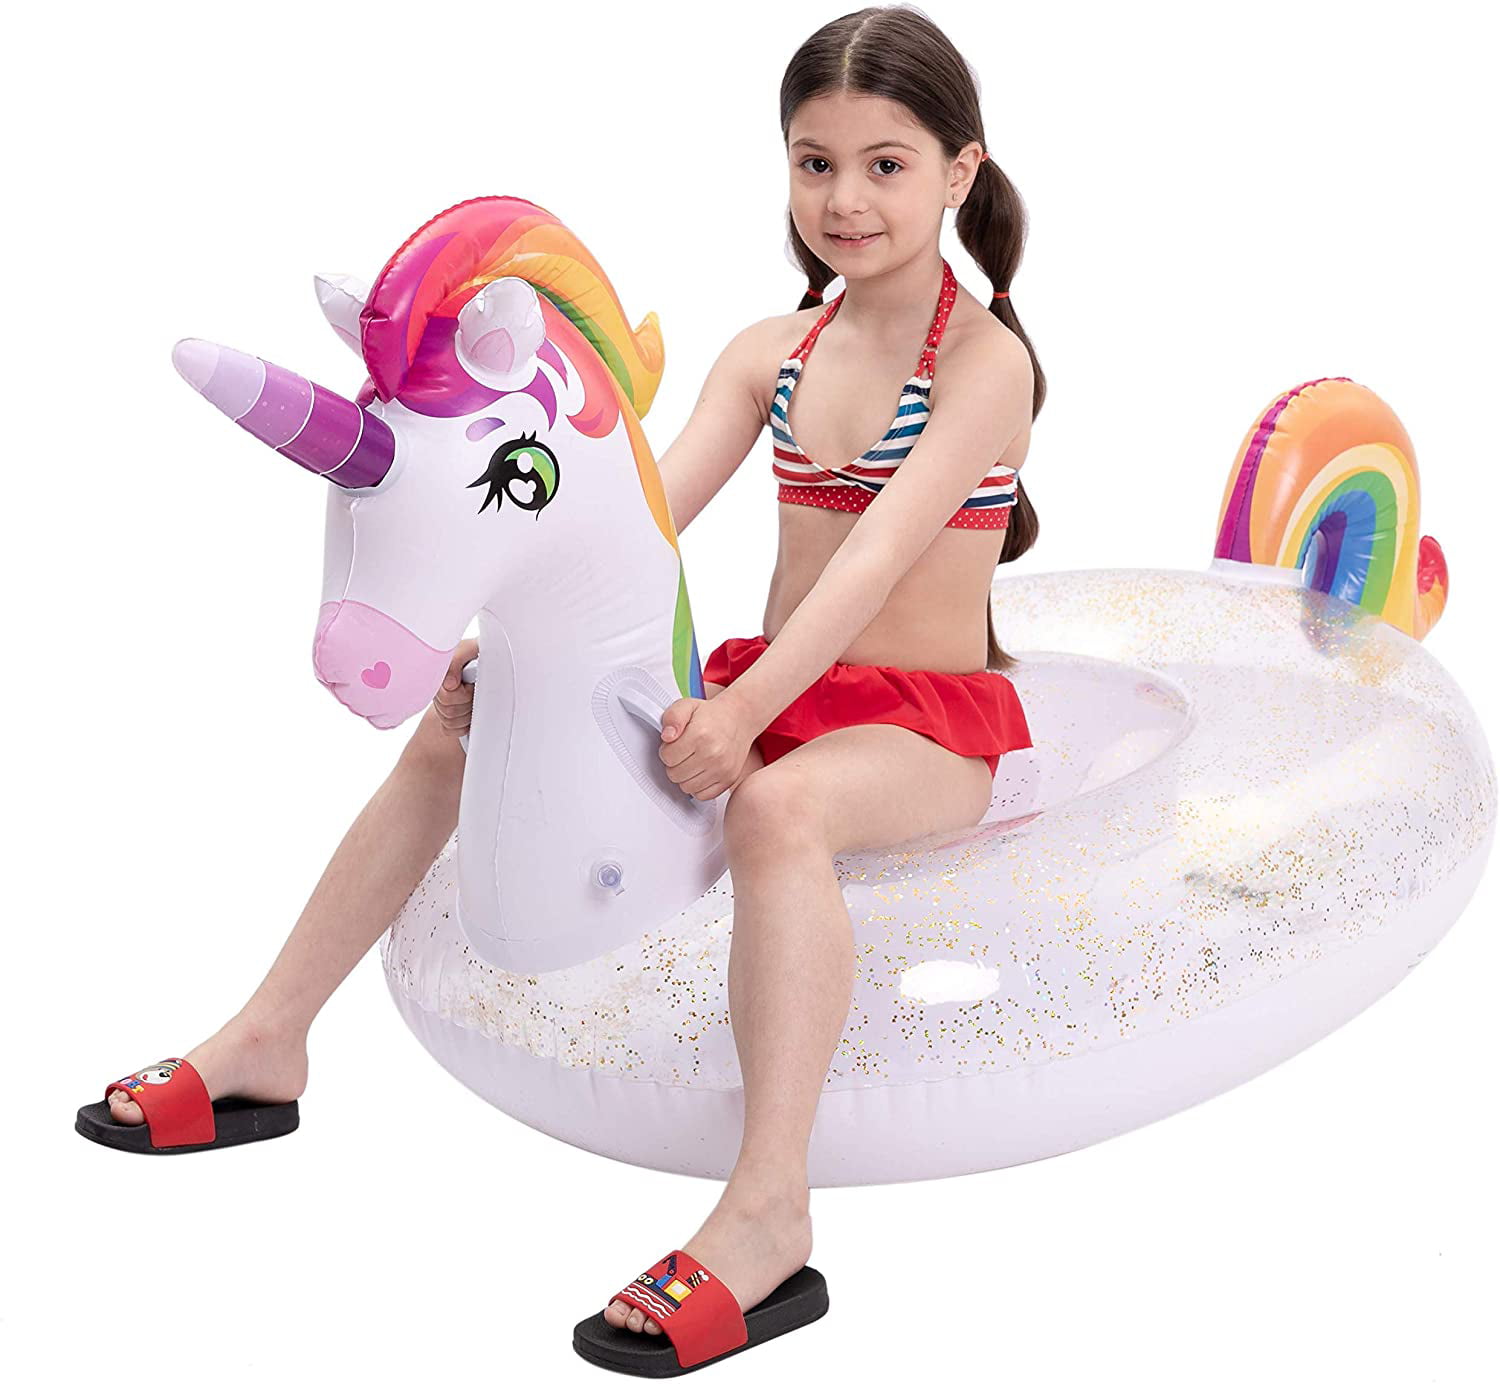 YSQ Giant Inflatable Rabbit Pool Float Pool Tube with Fast Valves Summer Beach S 